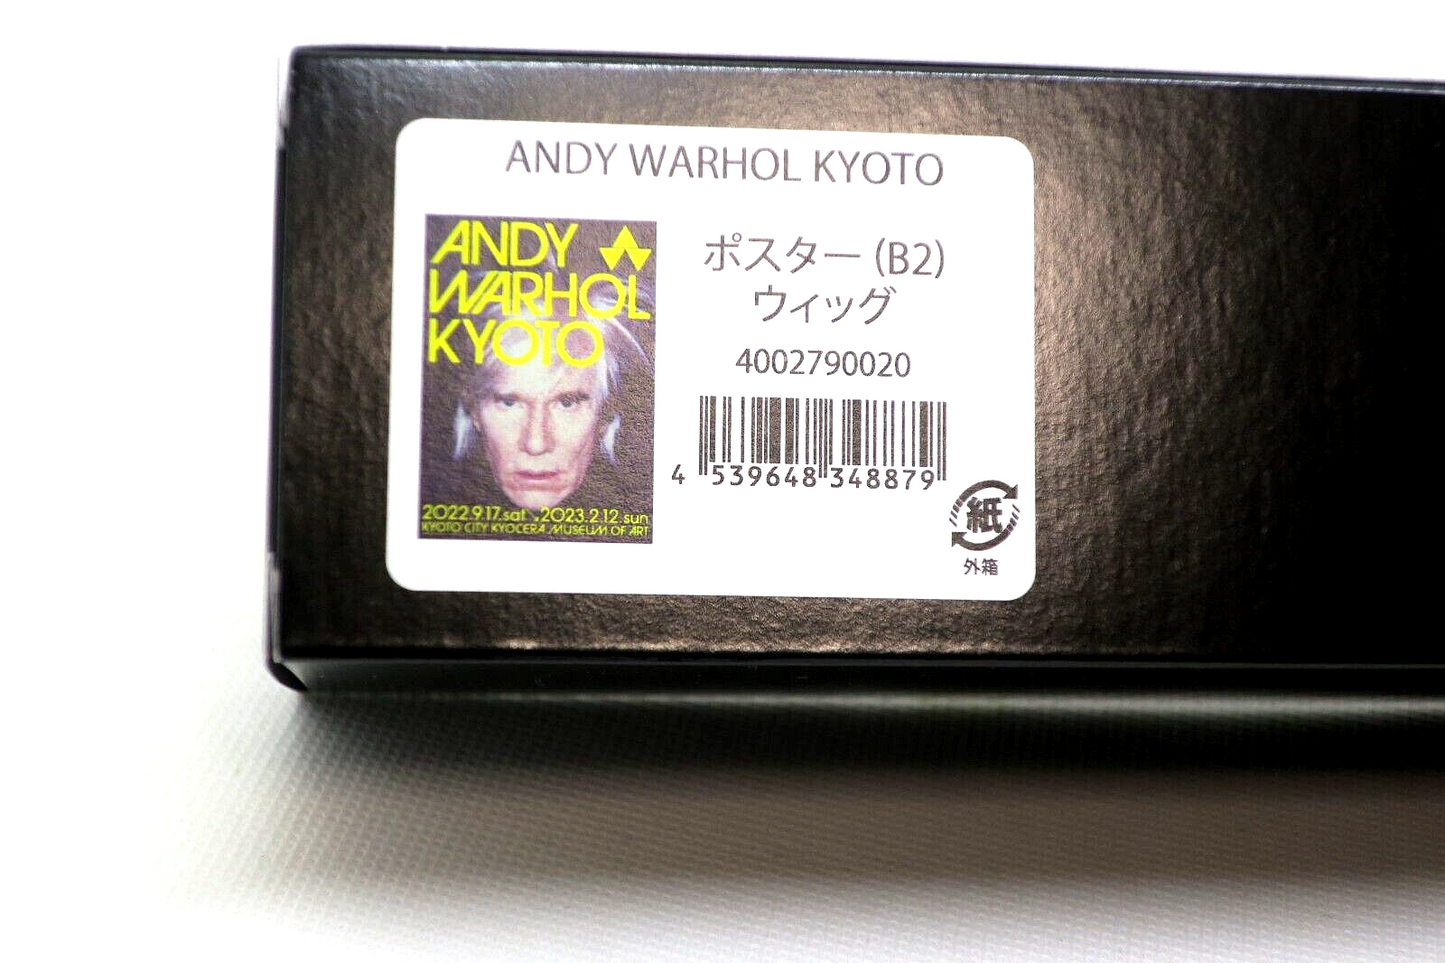 Rare ANDY WARHOL KYOTO Exhibition Official Poster B2 Wig From Kyoto Japan